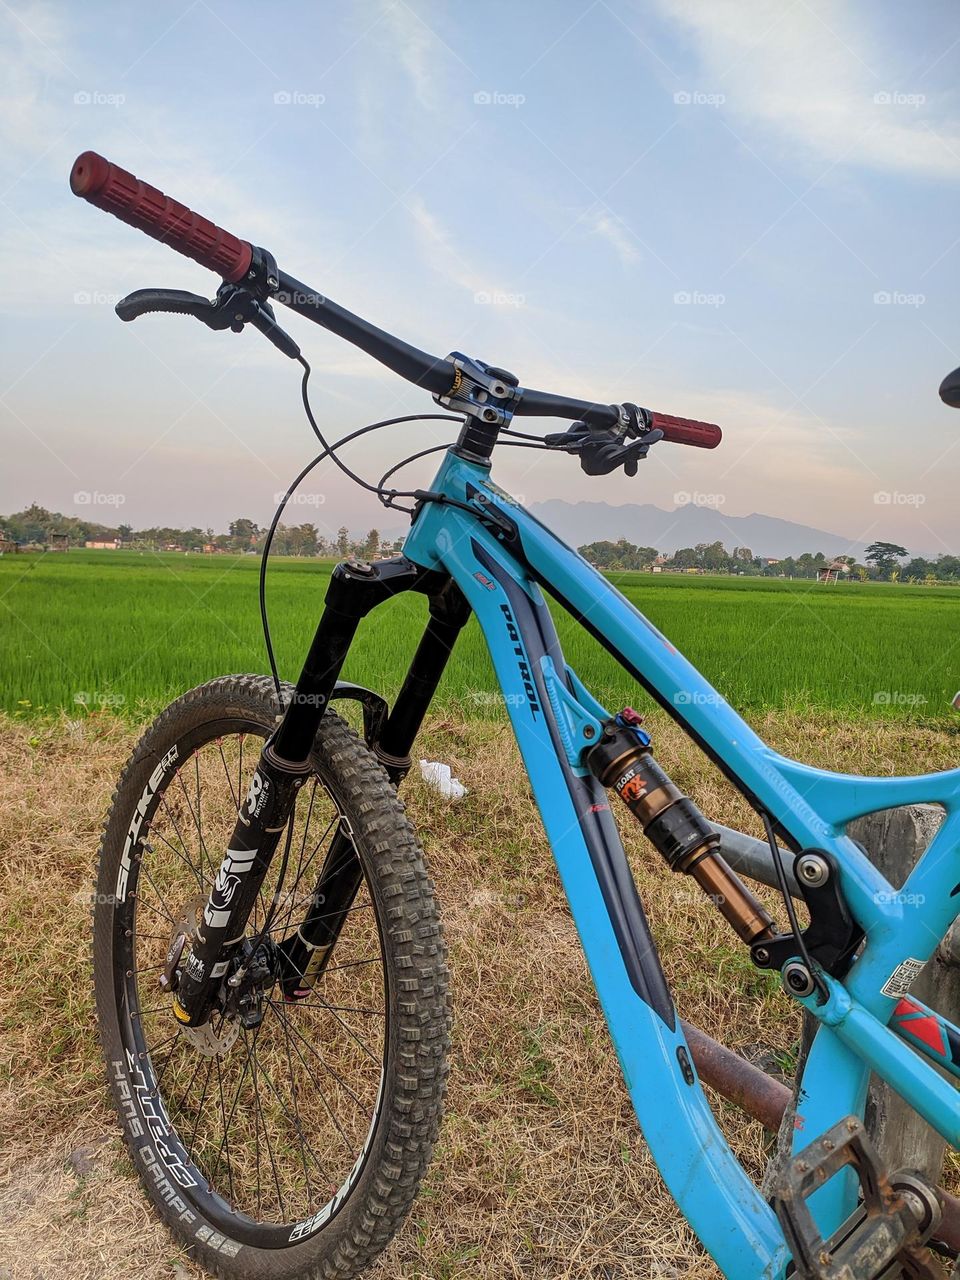 Mountain bike leaning against, nature background